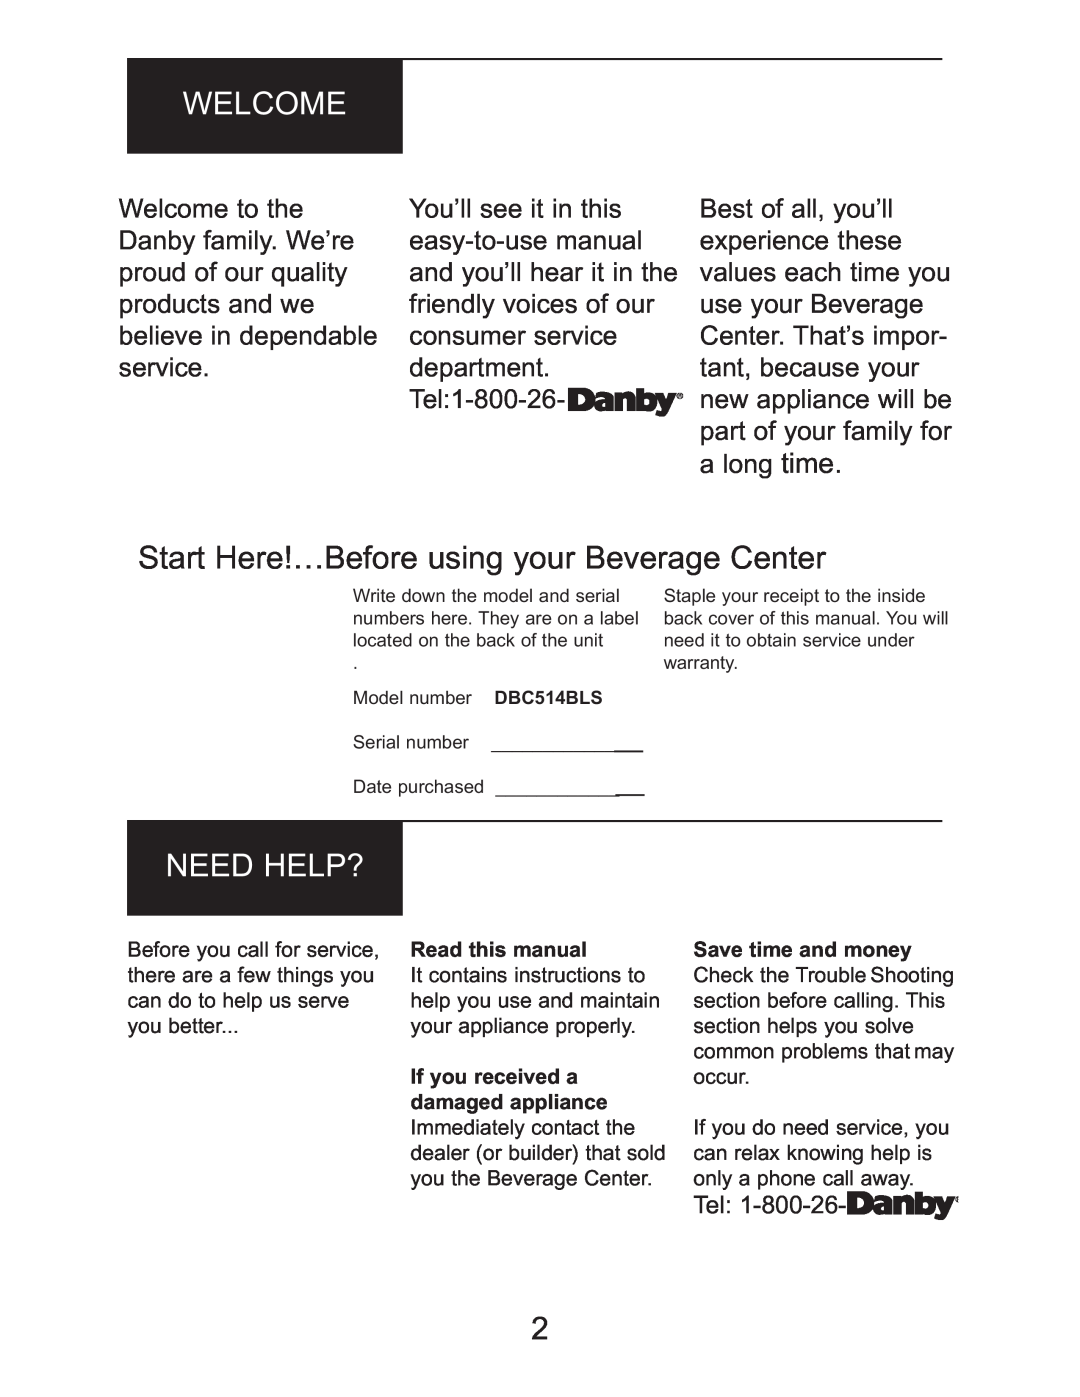 Danby DBC514BLS owner manual Welcome, Start Here!…Before using your Beverage Center, Need Help? 